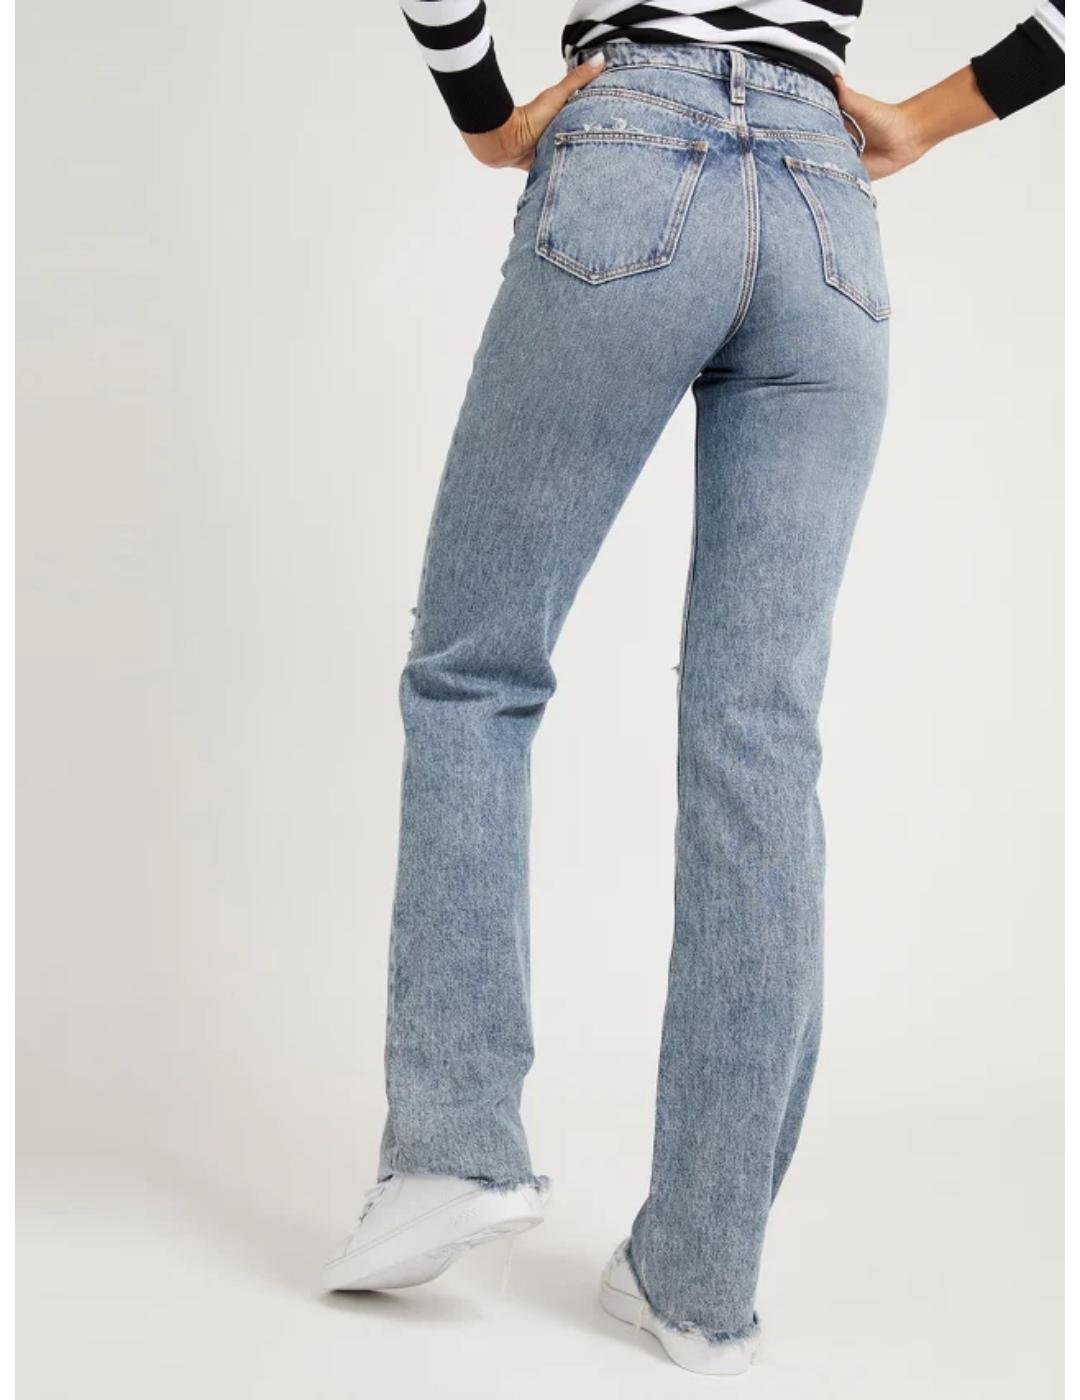 Jeans Guess straight para mujer